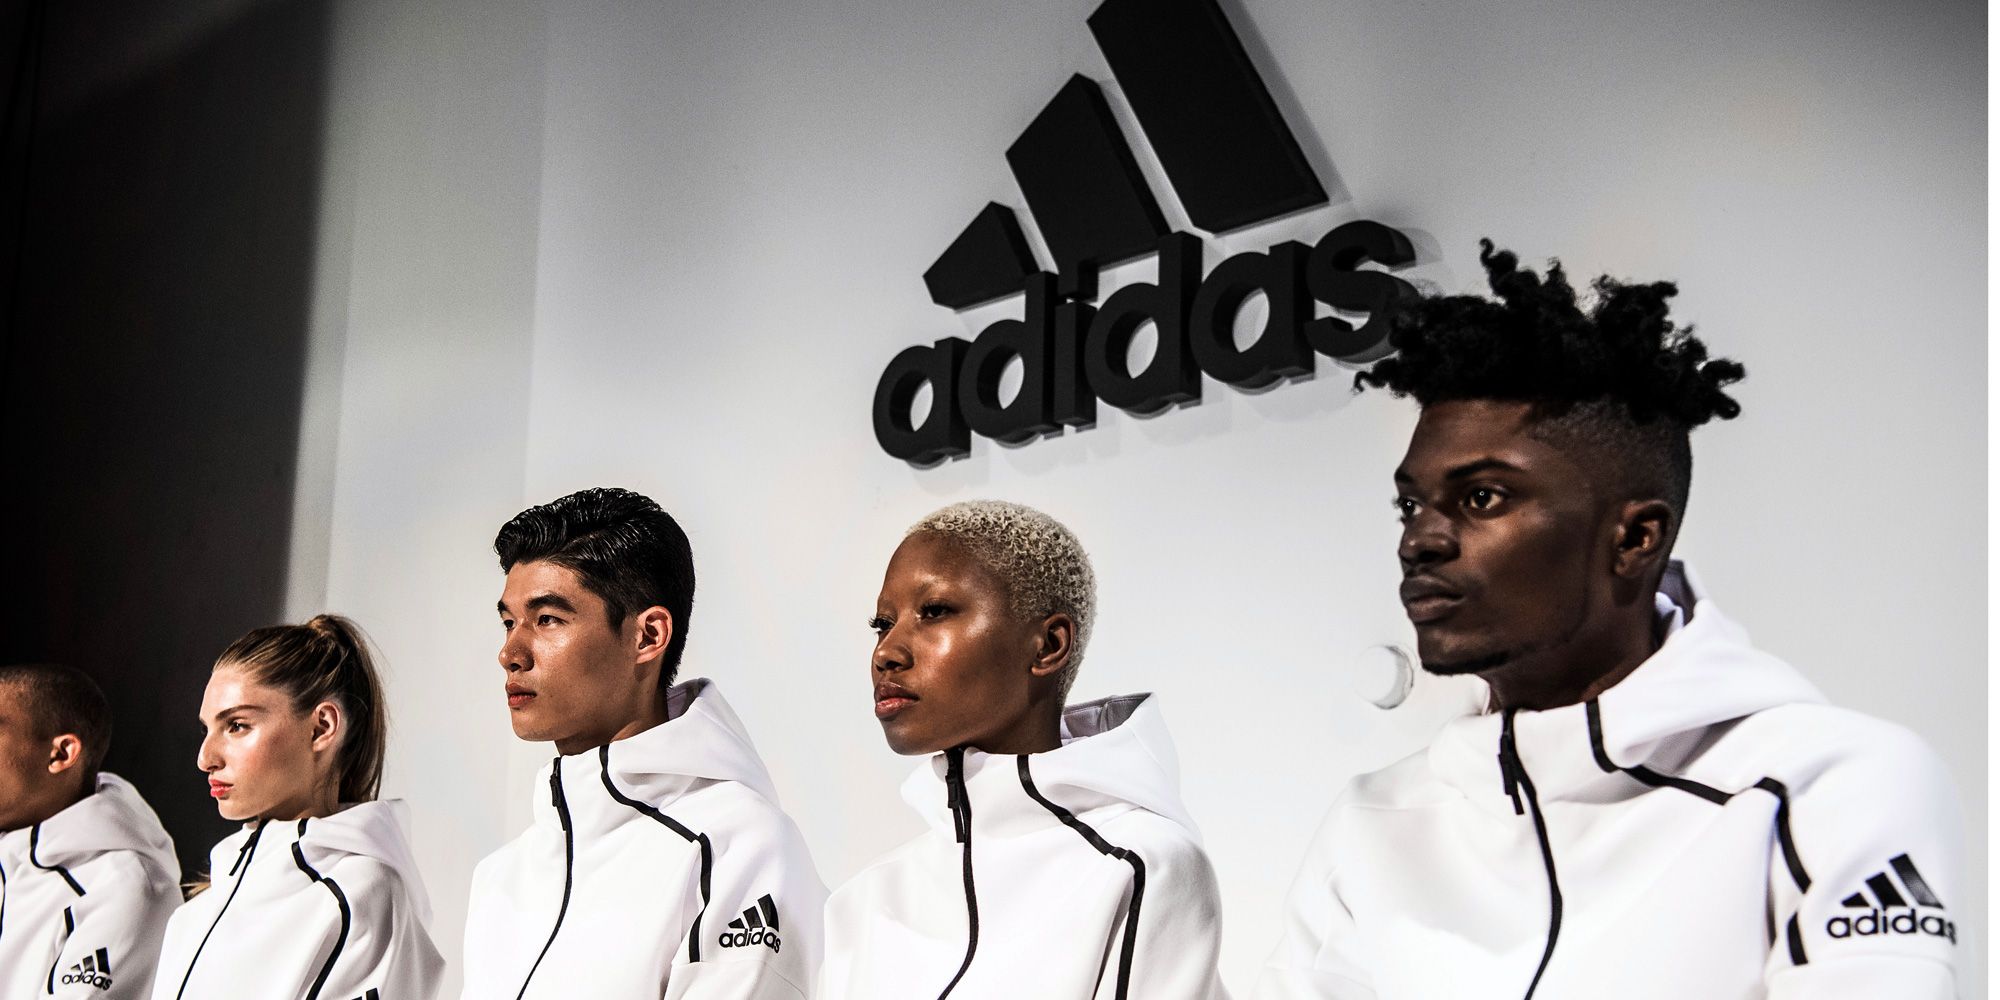 Adidas' New Clothing Line and Performance